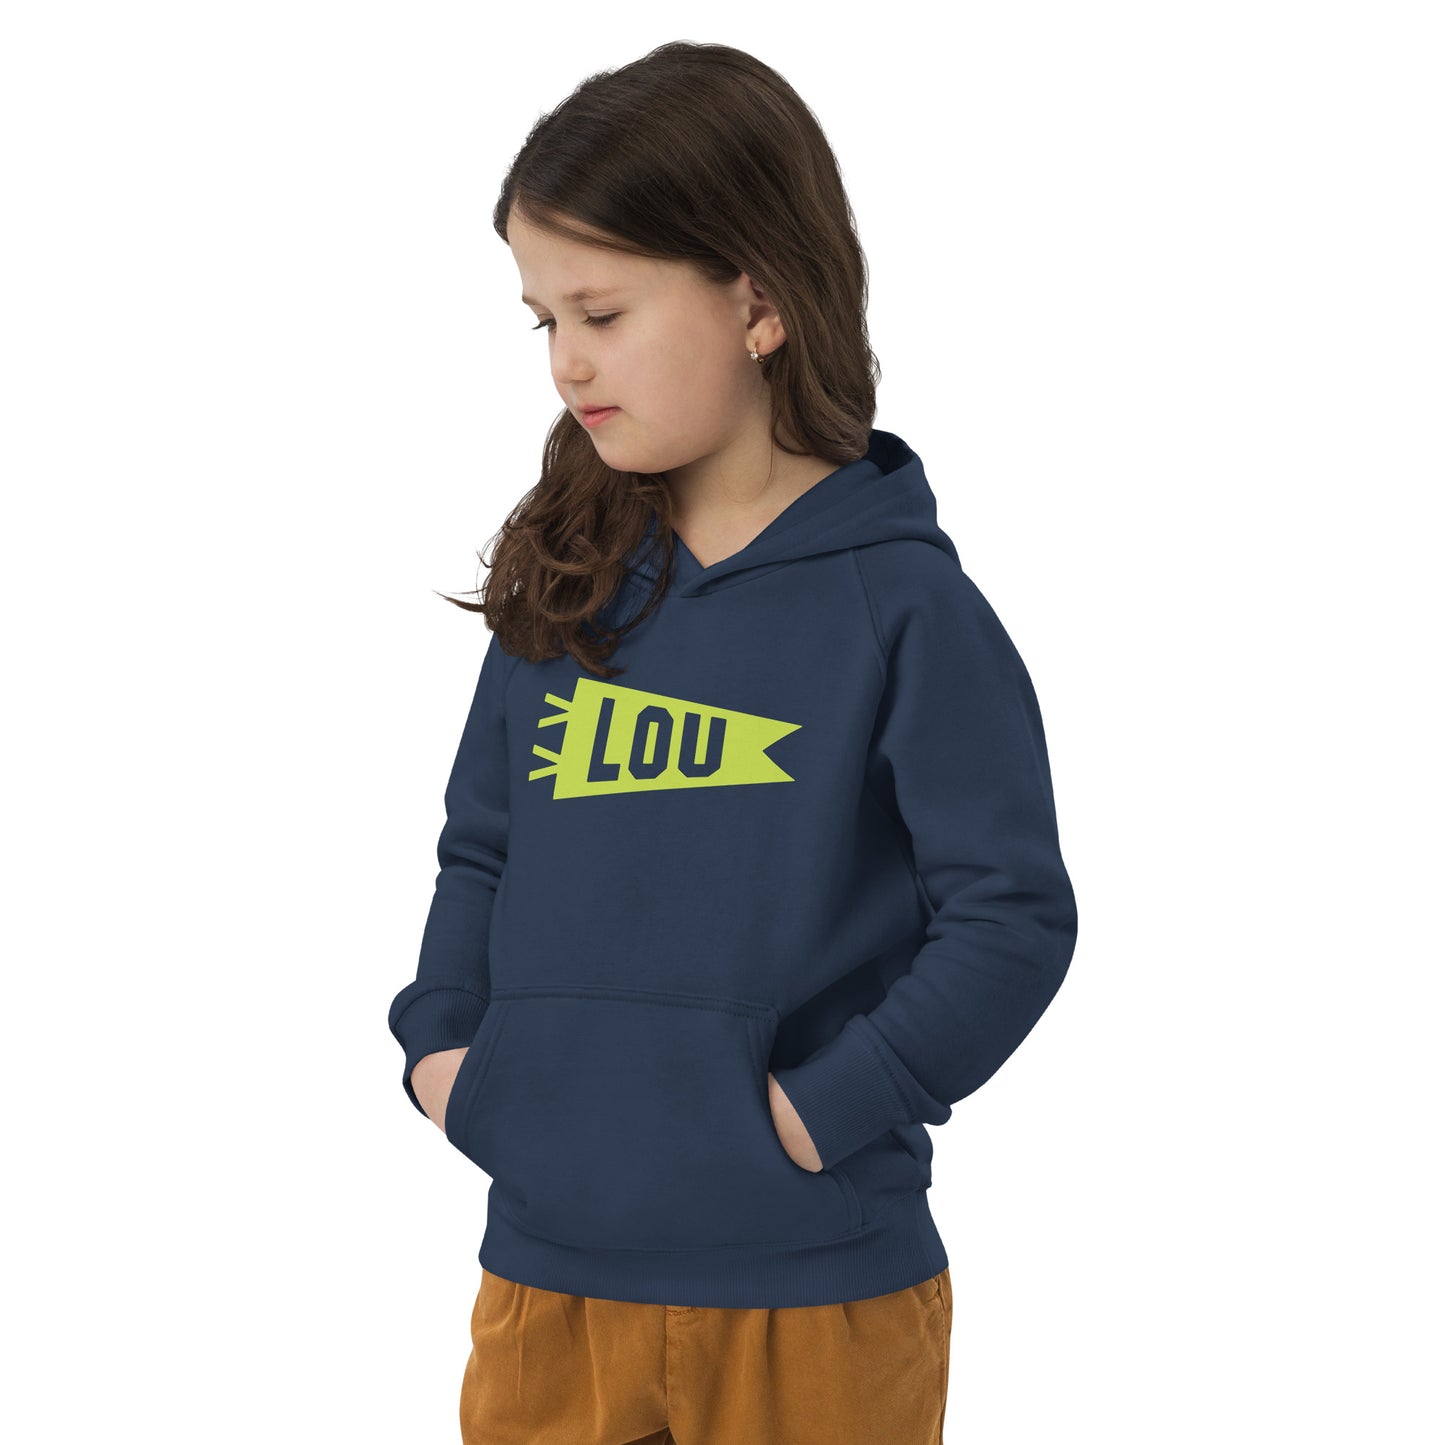 Kid's Sustainable Hoodie - Green Graphic • LOU Louisville • YHM Designs - Image 05